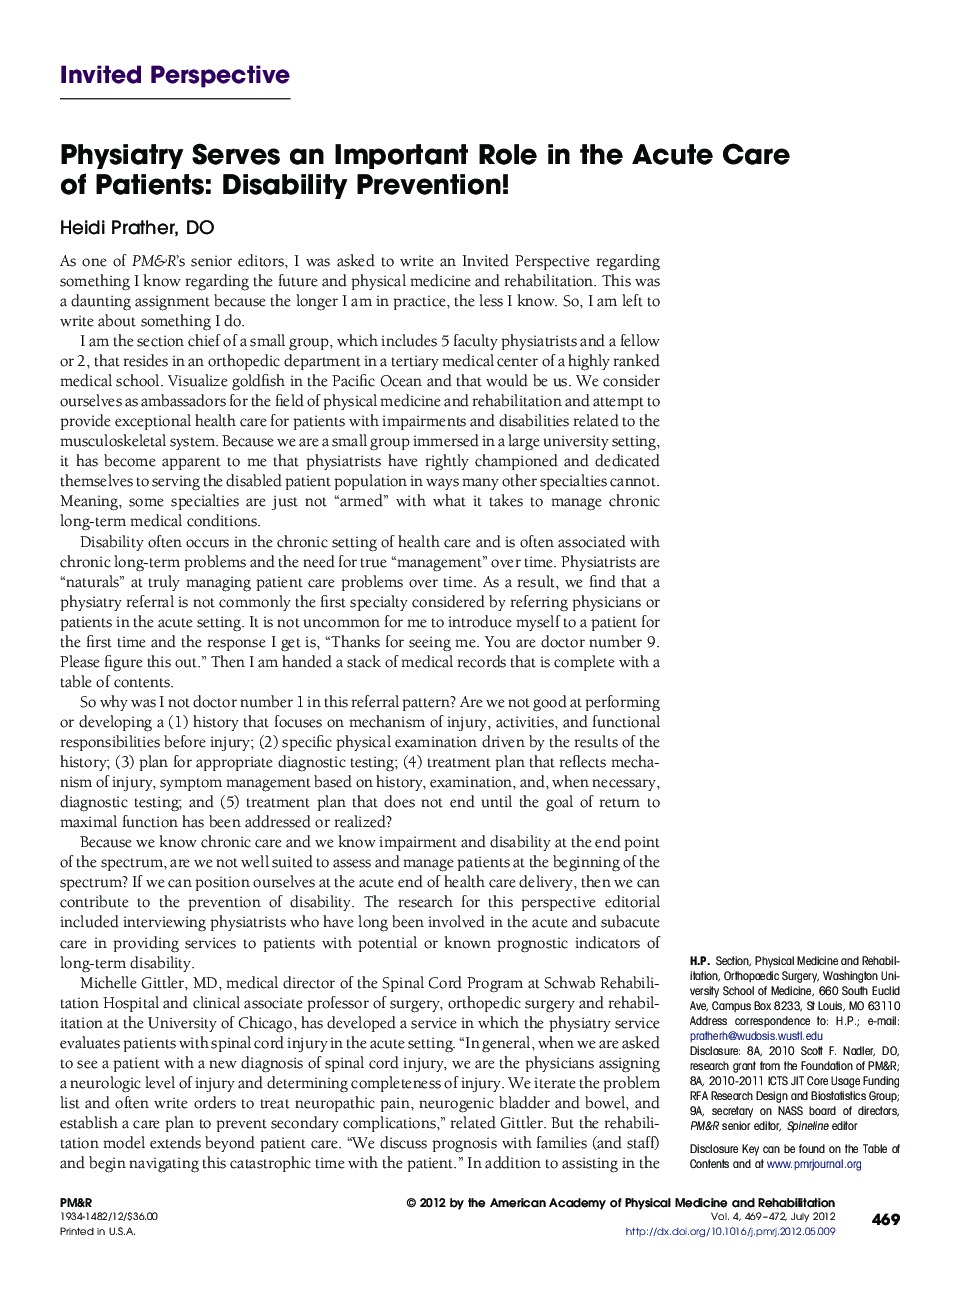 Physiatry Serves an Important Role in the Acute Care of Patients: Disability Prevention!